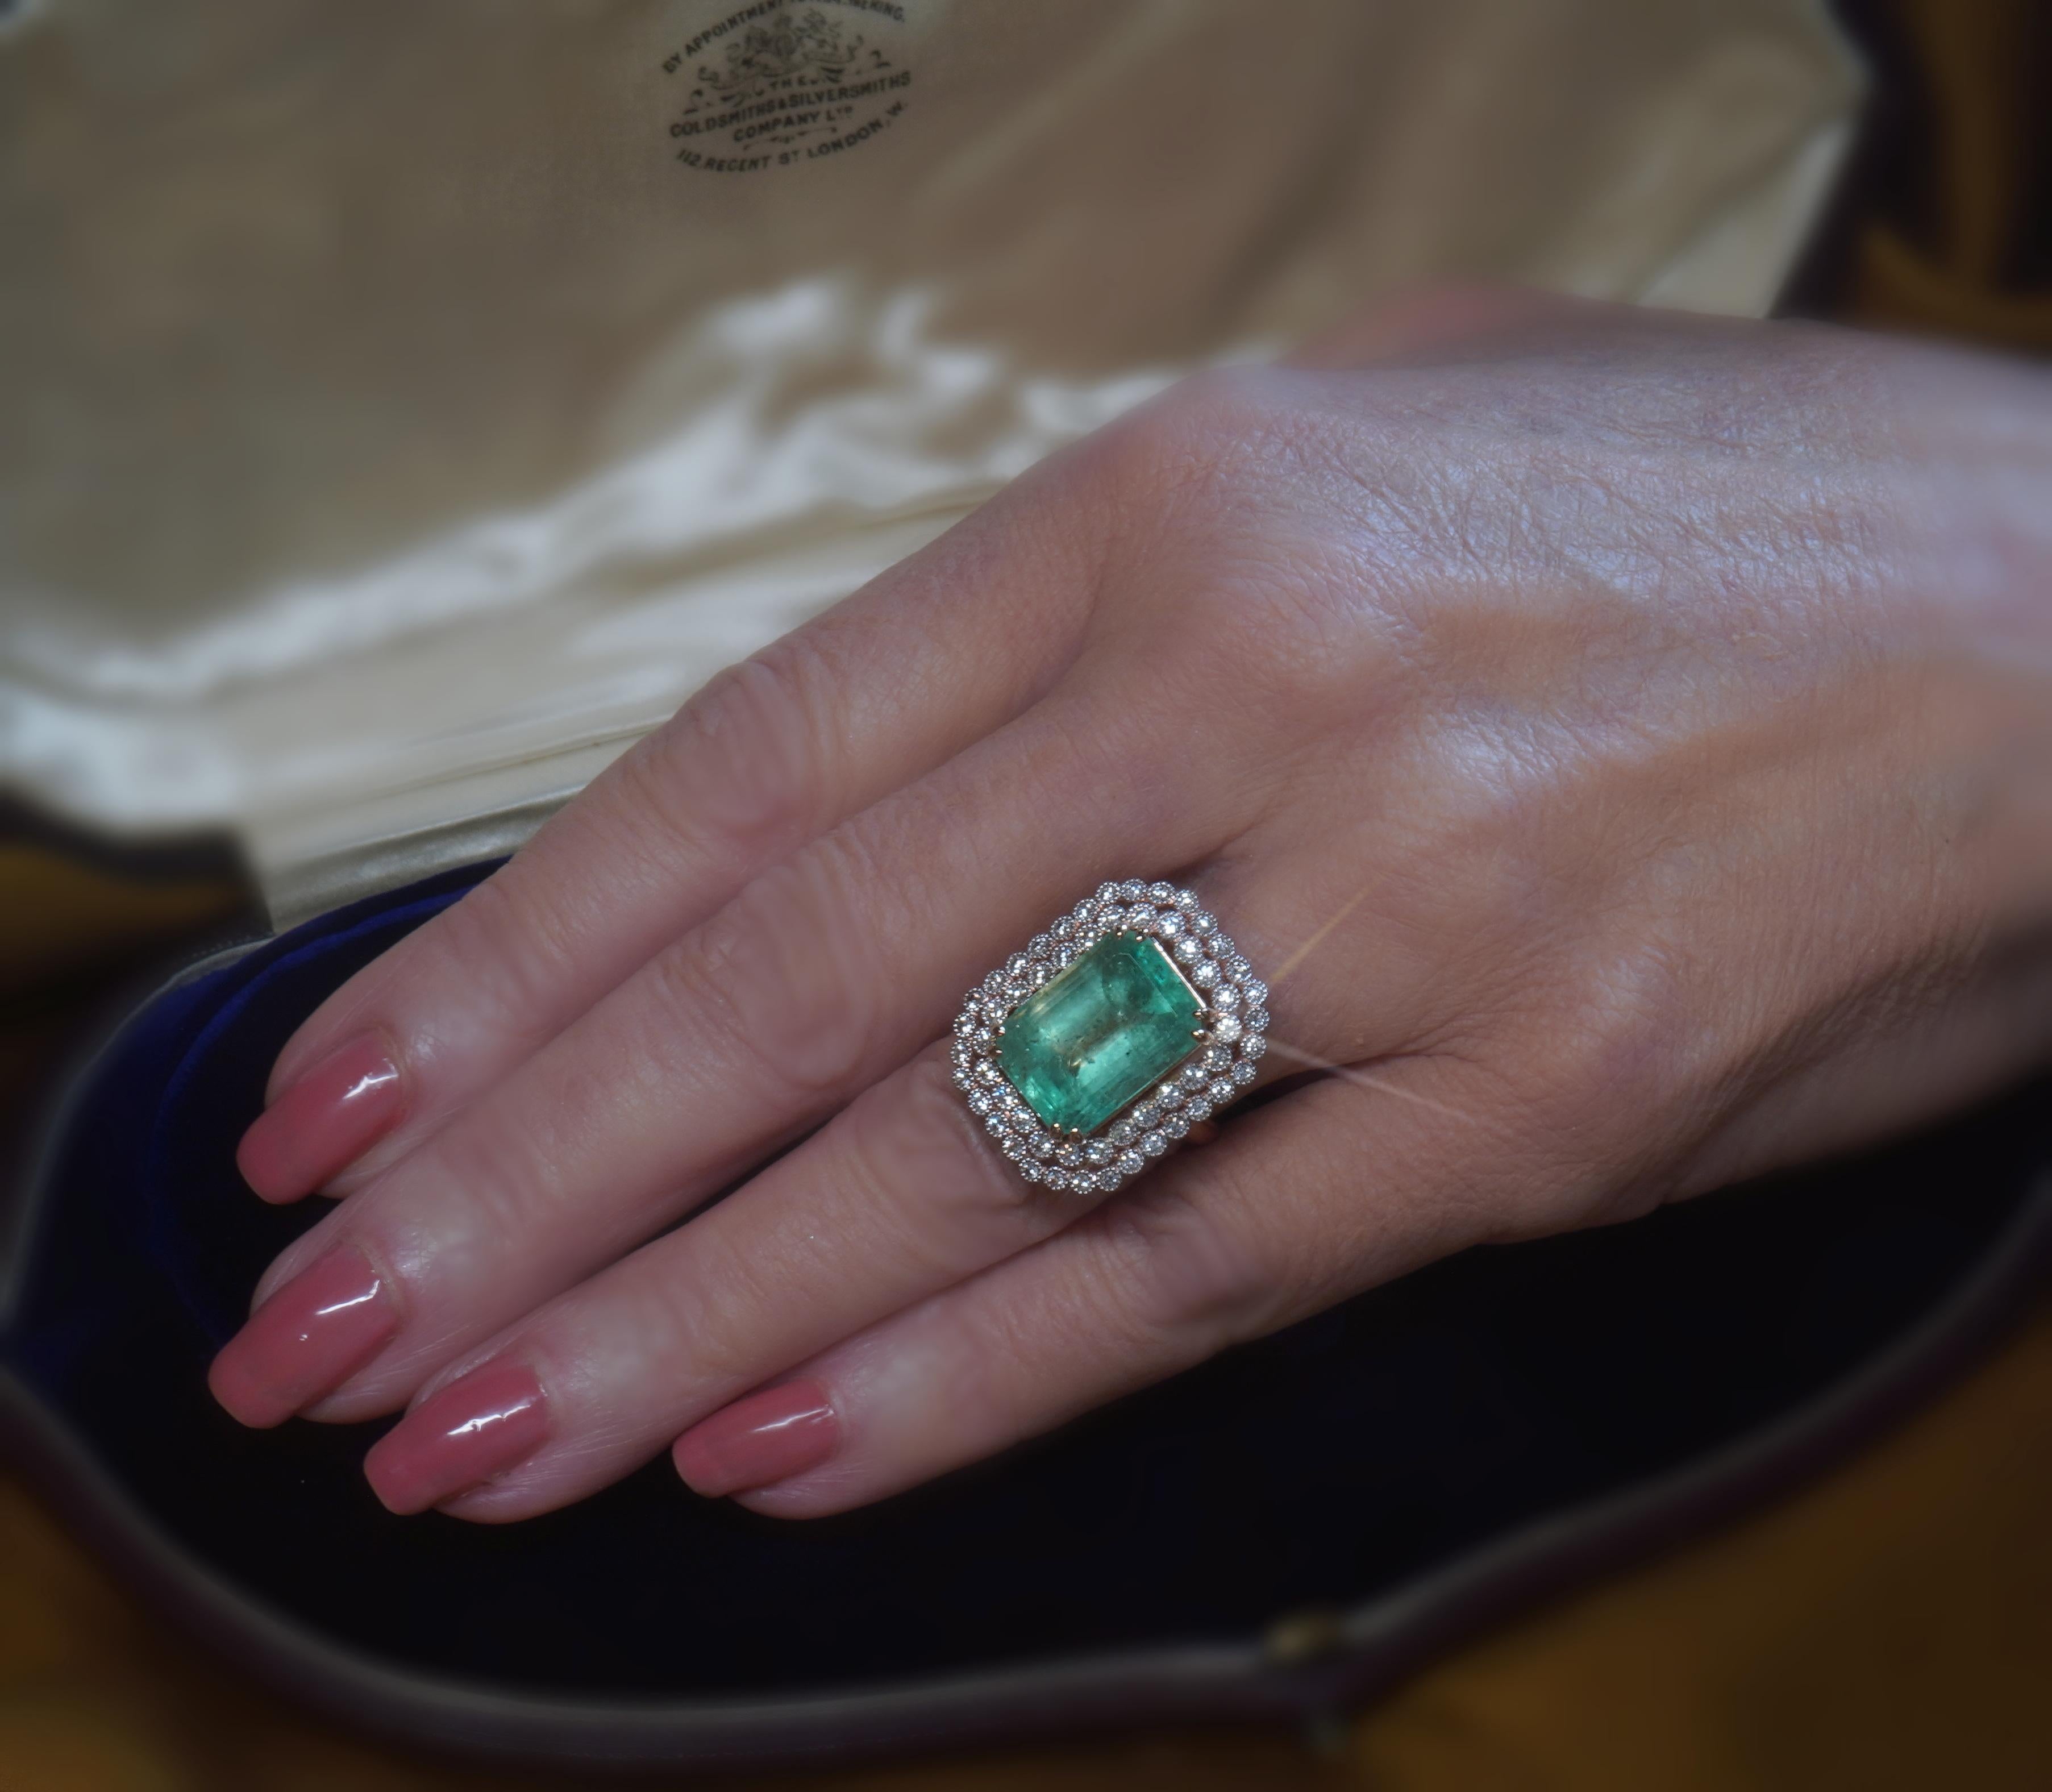 Old South Jewels proudly presents...VINTAGE LUXURY.     TIFFANY & CO HUGE 18K GIA CERTIFIED COLUMBIAN EMERALD DIAMOND 12.16 CARAT RING!   VINTAGE GLOWING 10.76 CARAT TRANSPARENT NATURAL COLUMBIAN EMERALD.    CROWNED WITH VS SPARKLING WHITE EYE CLEAN